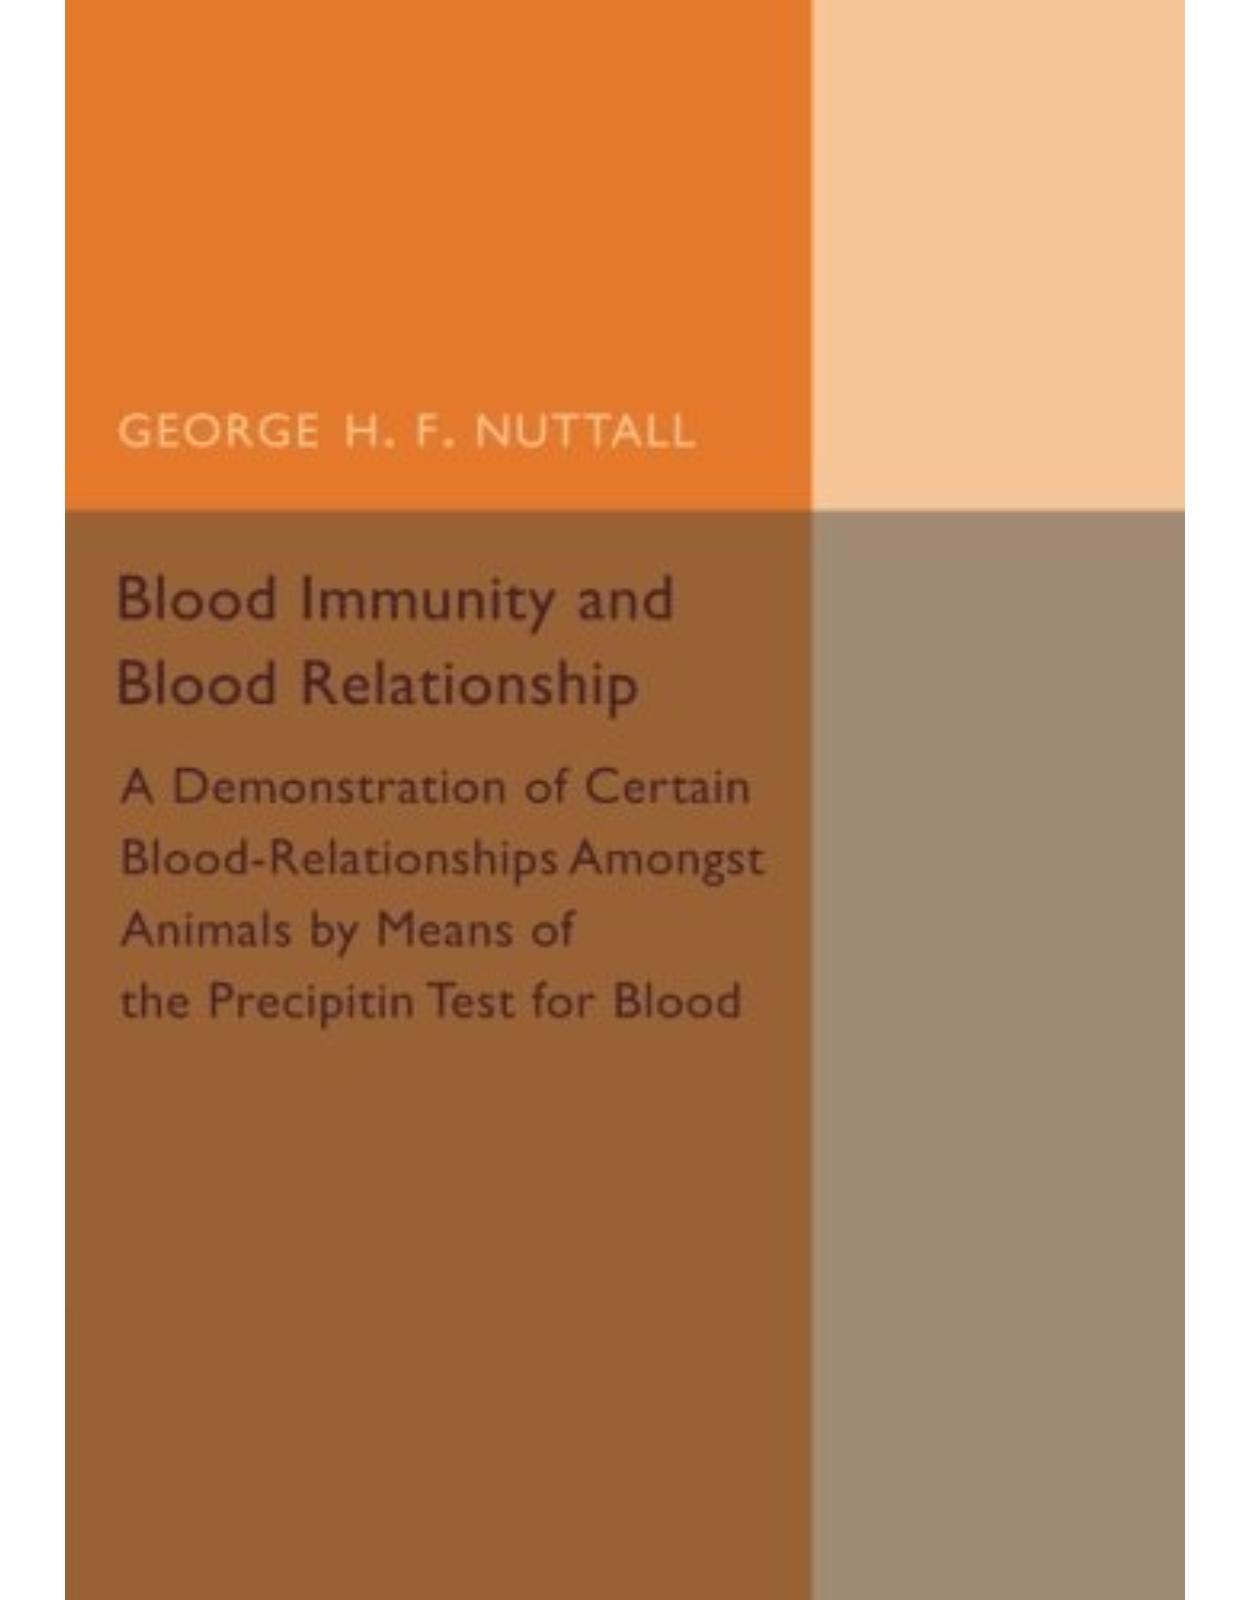 Blood Immunity and Blood Relationship: A Demonstration of Certain Blood-Relationships amongst Animals by Means of the Precipitin Test for Blood